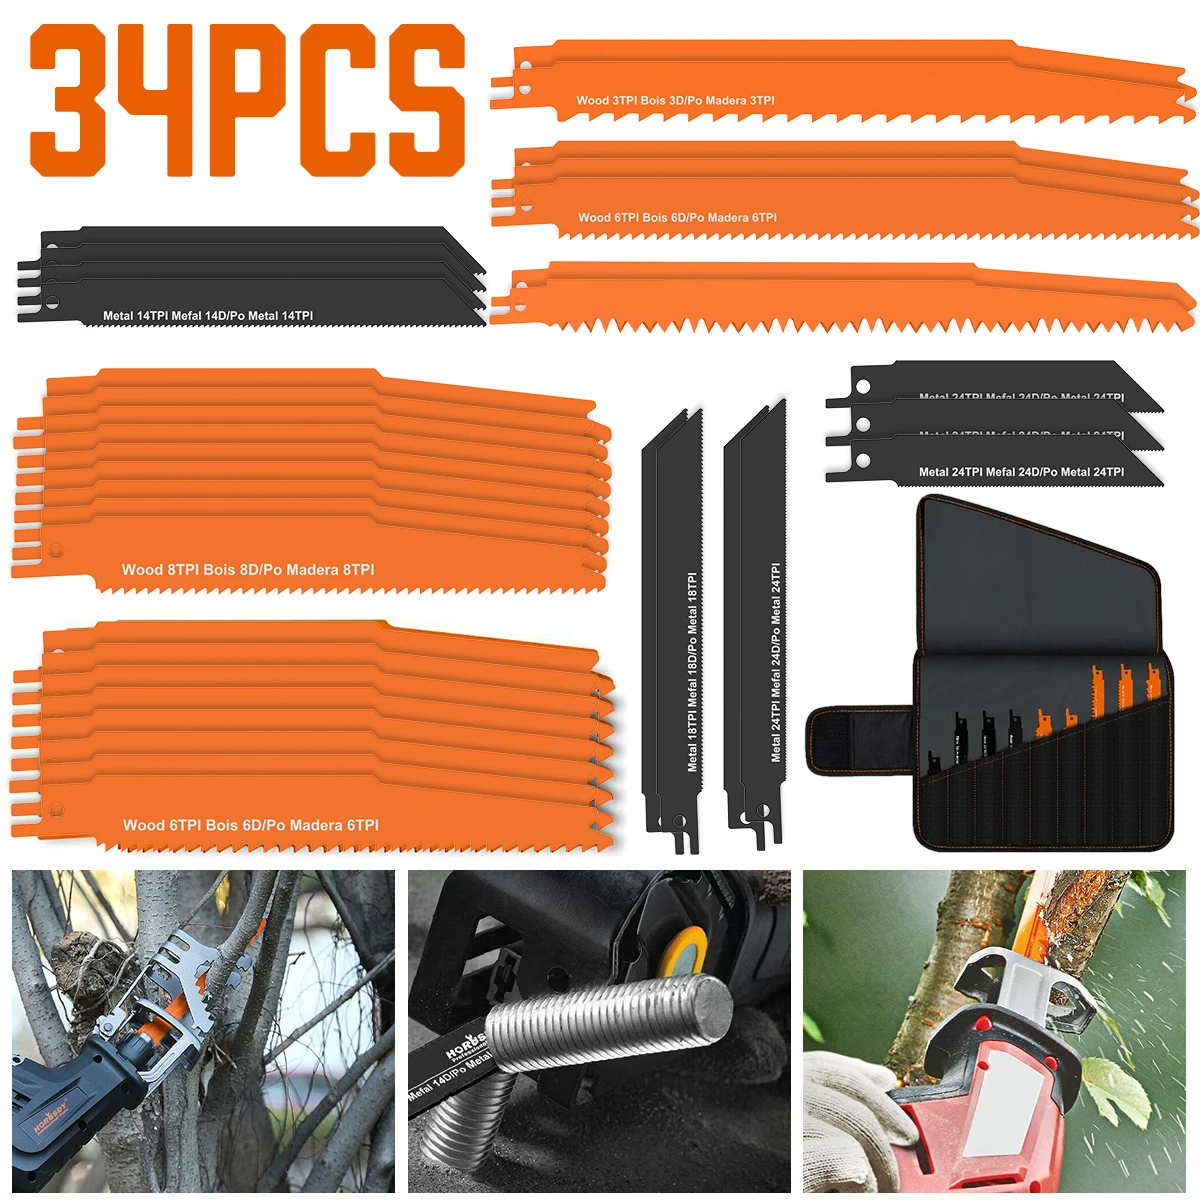 34Pcs Reciprocating Saw Blade Jigsaw Blade Premium Saw Blades Wood Pruning  For Wood Metal PVC Pipe Plastic Cutting Suit